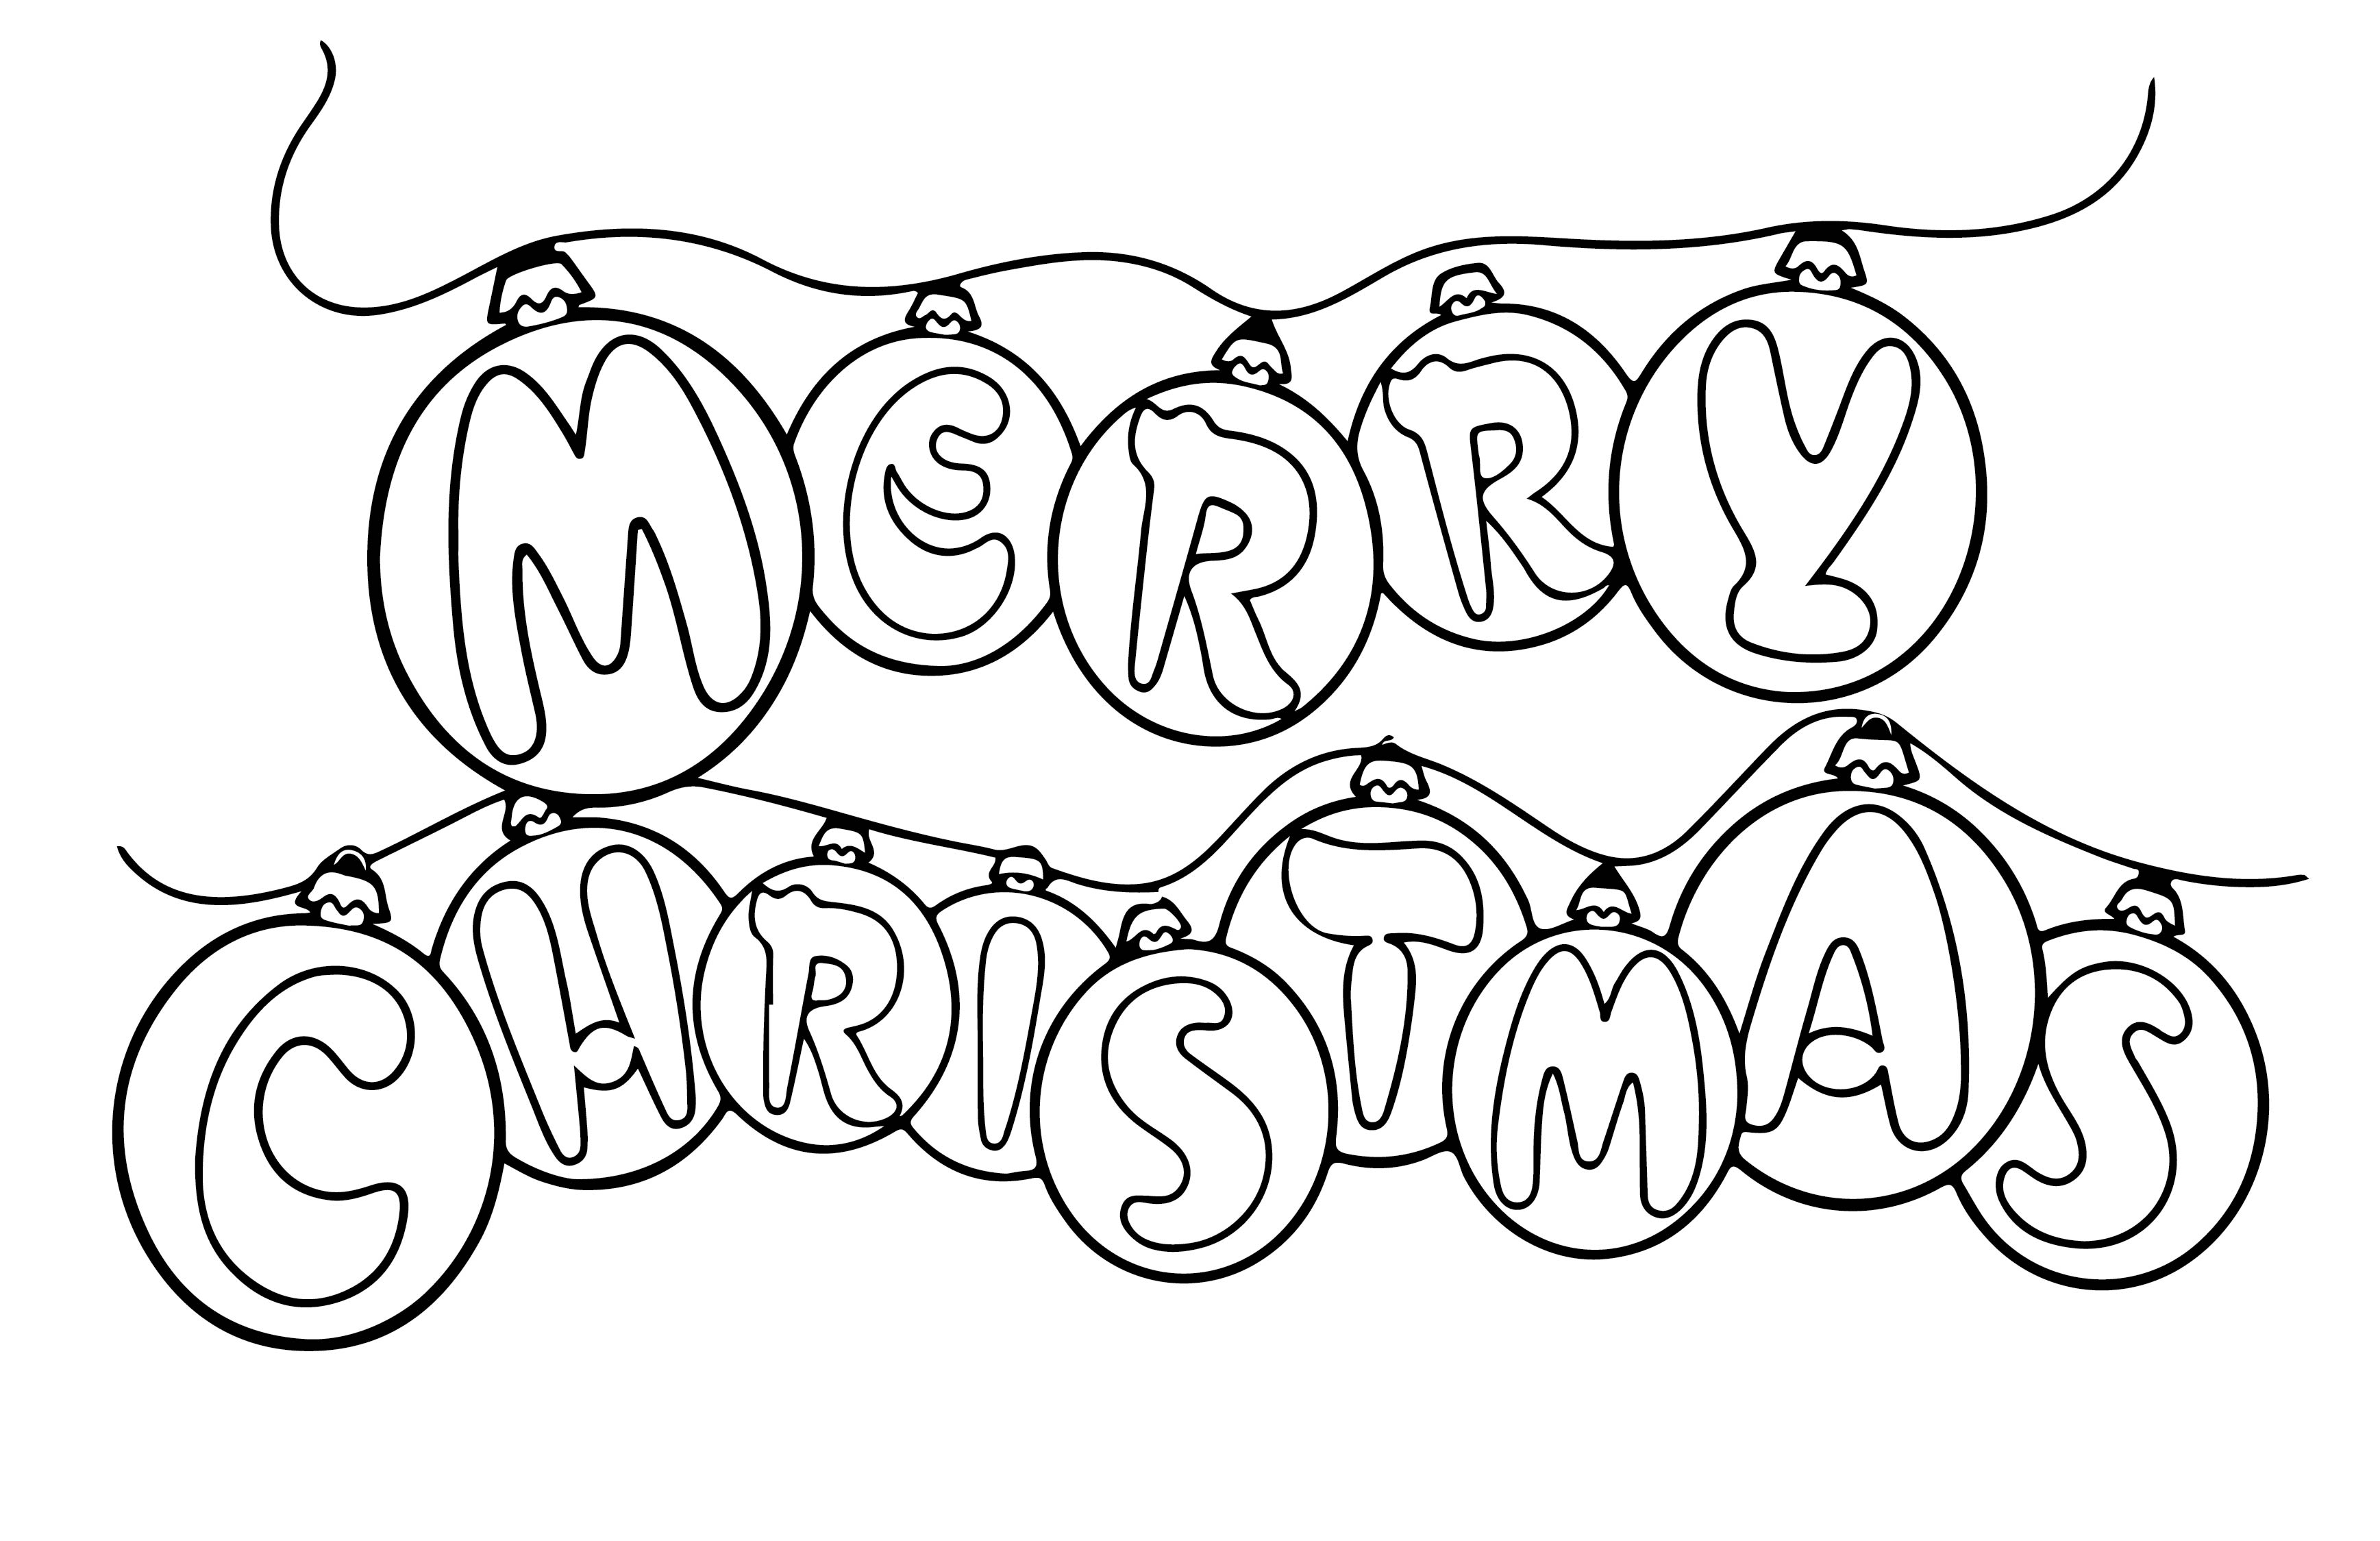 5-best-images-of-christmas-coloring-pages-printable-product-merry-christmas-coloring-pages